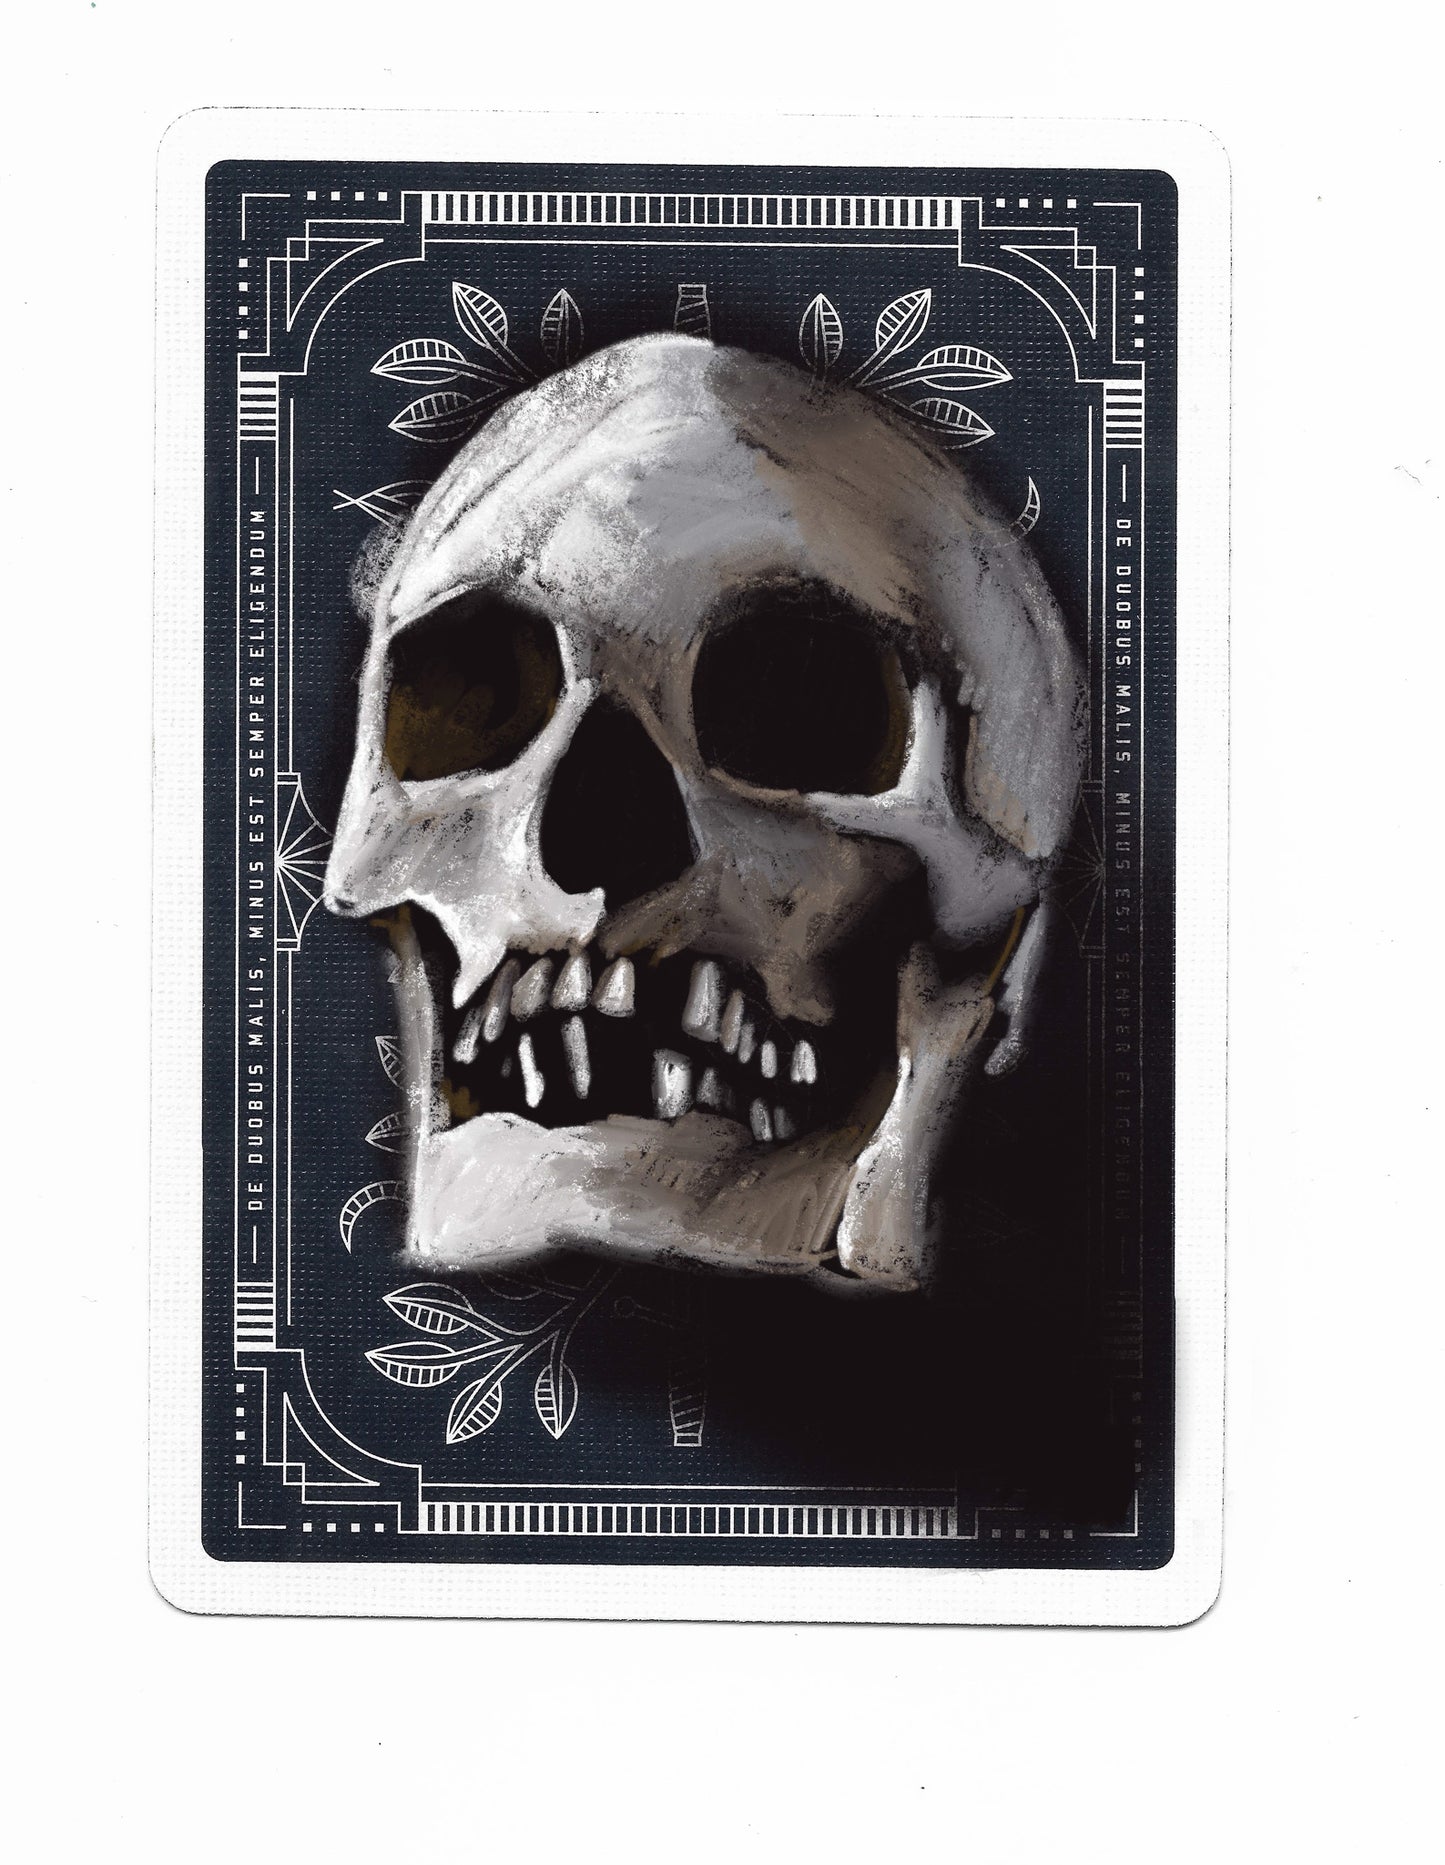 Fine Art Prints | Playing Card Paintings: Dreams